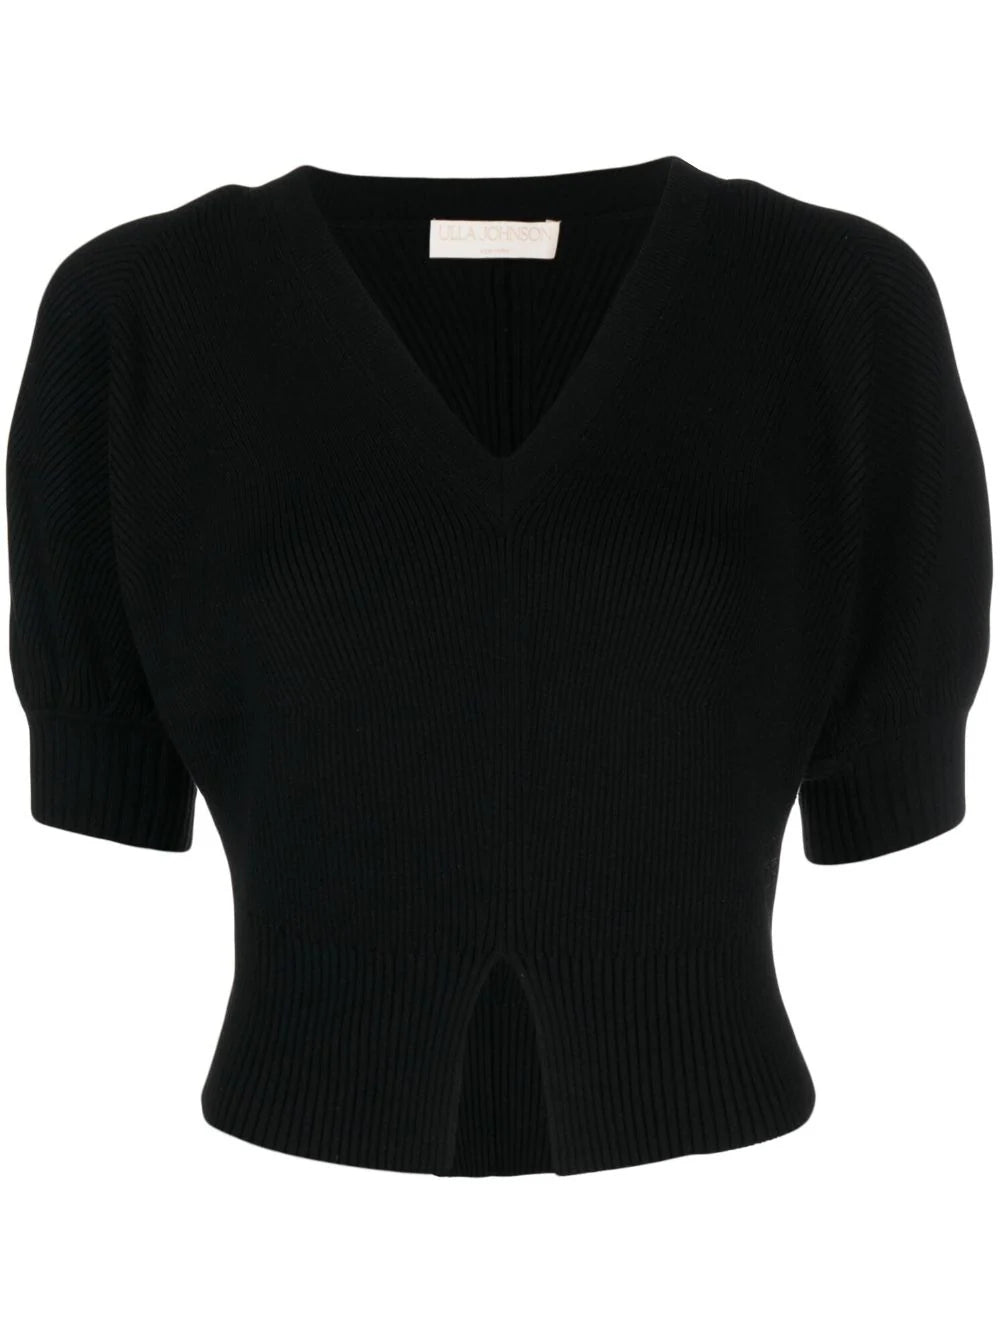 Eila knitted top, black